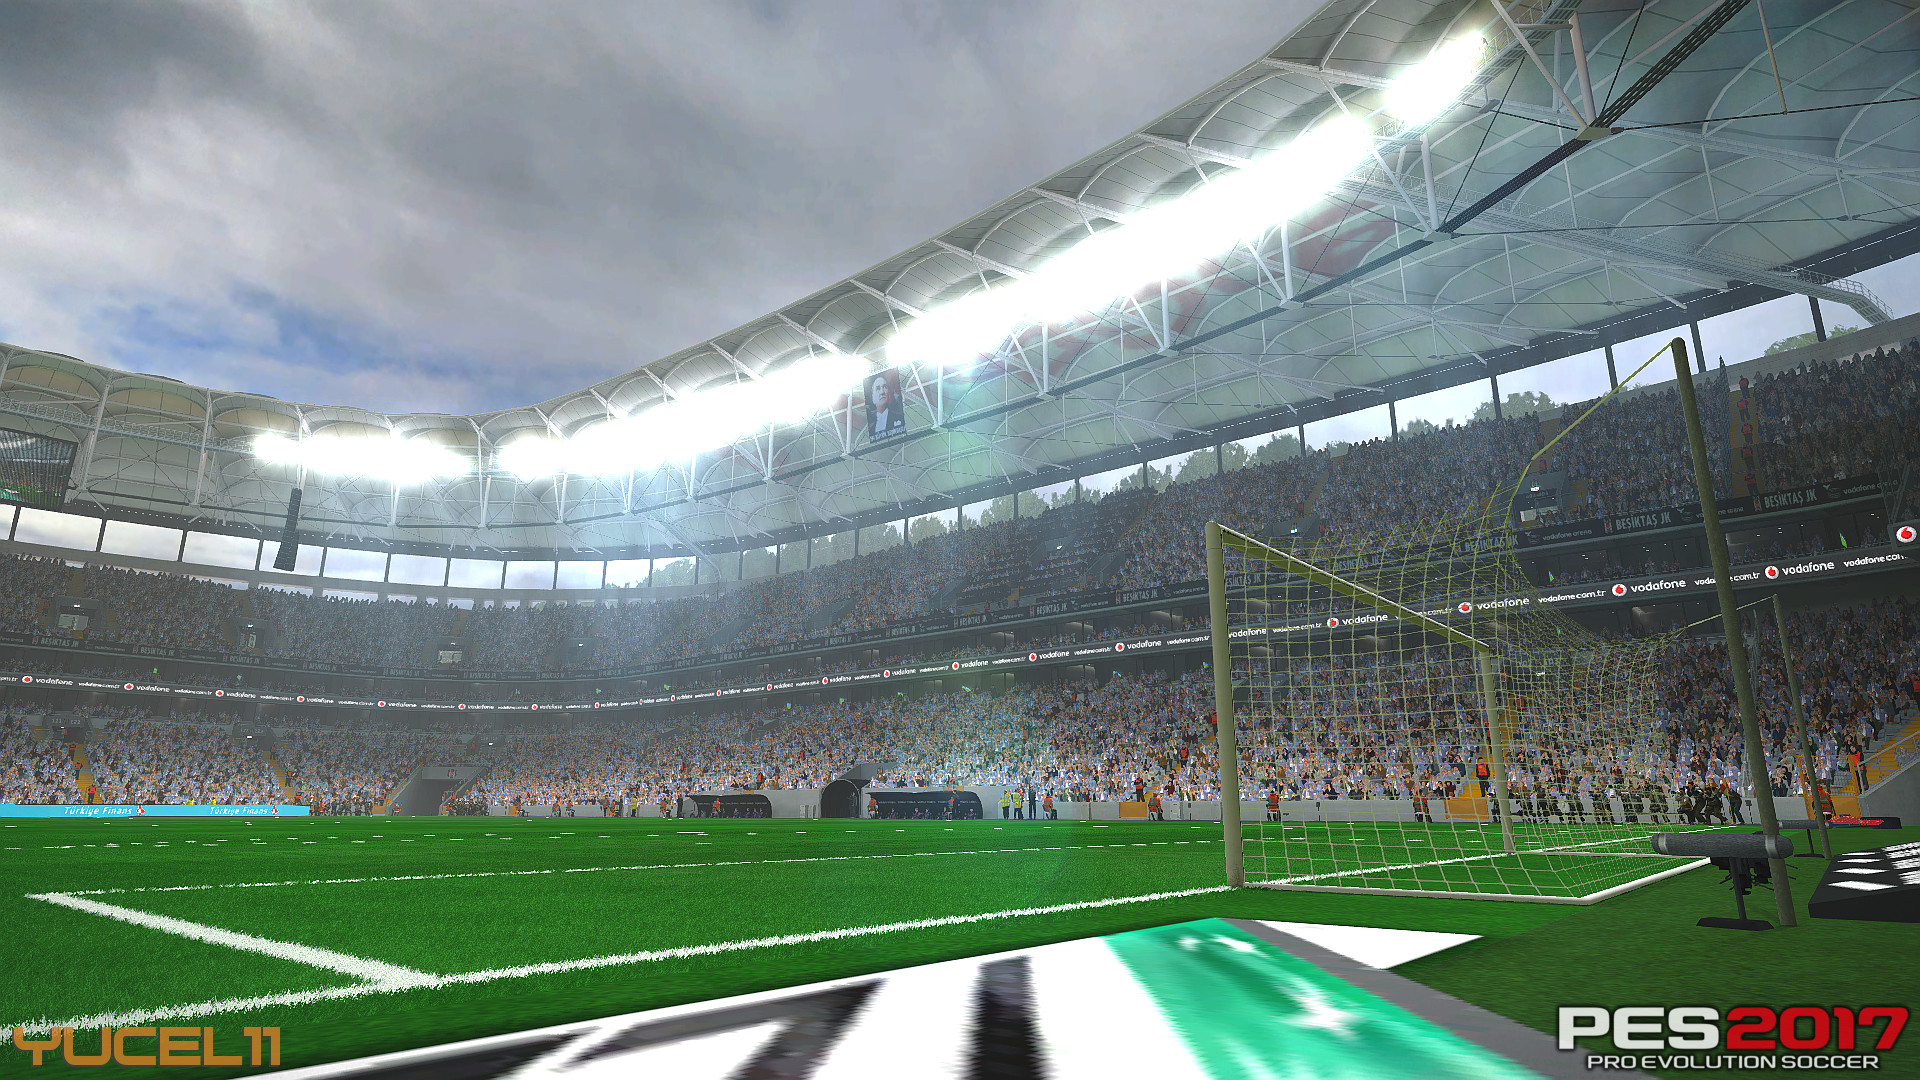 Pes 17 Besiktas Vodafone Arena Project Finished Projects Blender Artists Community